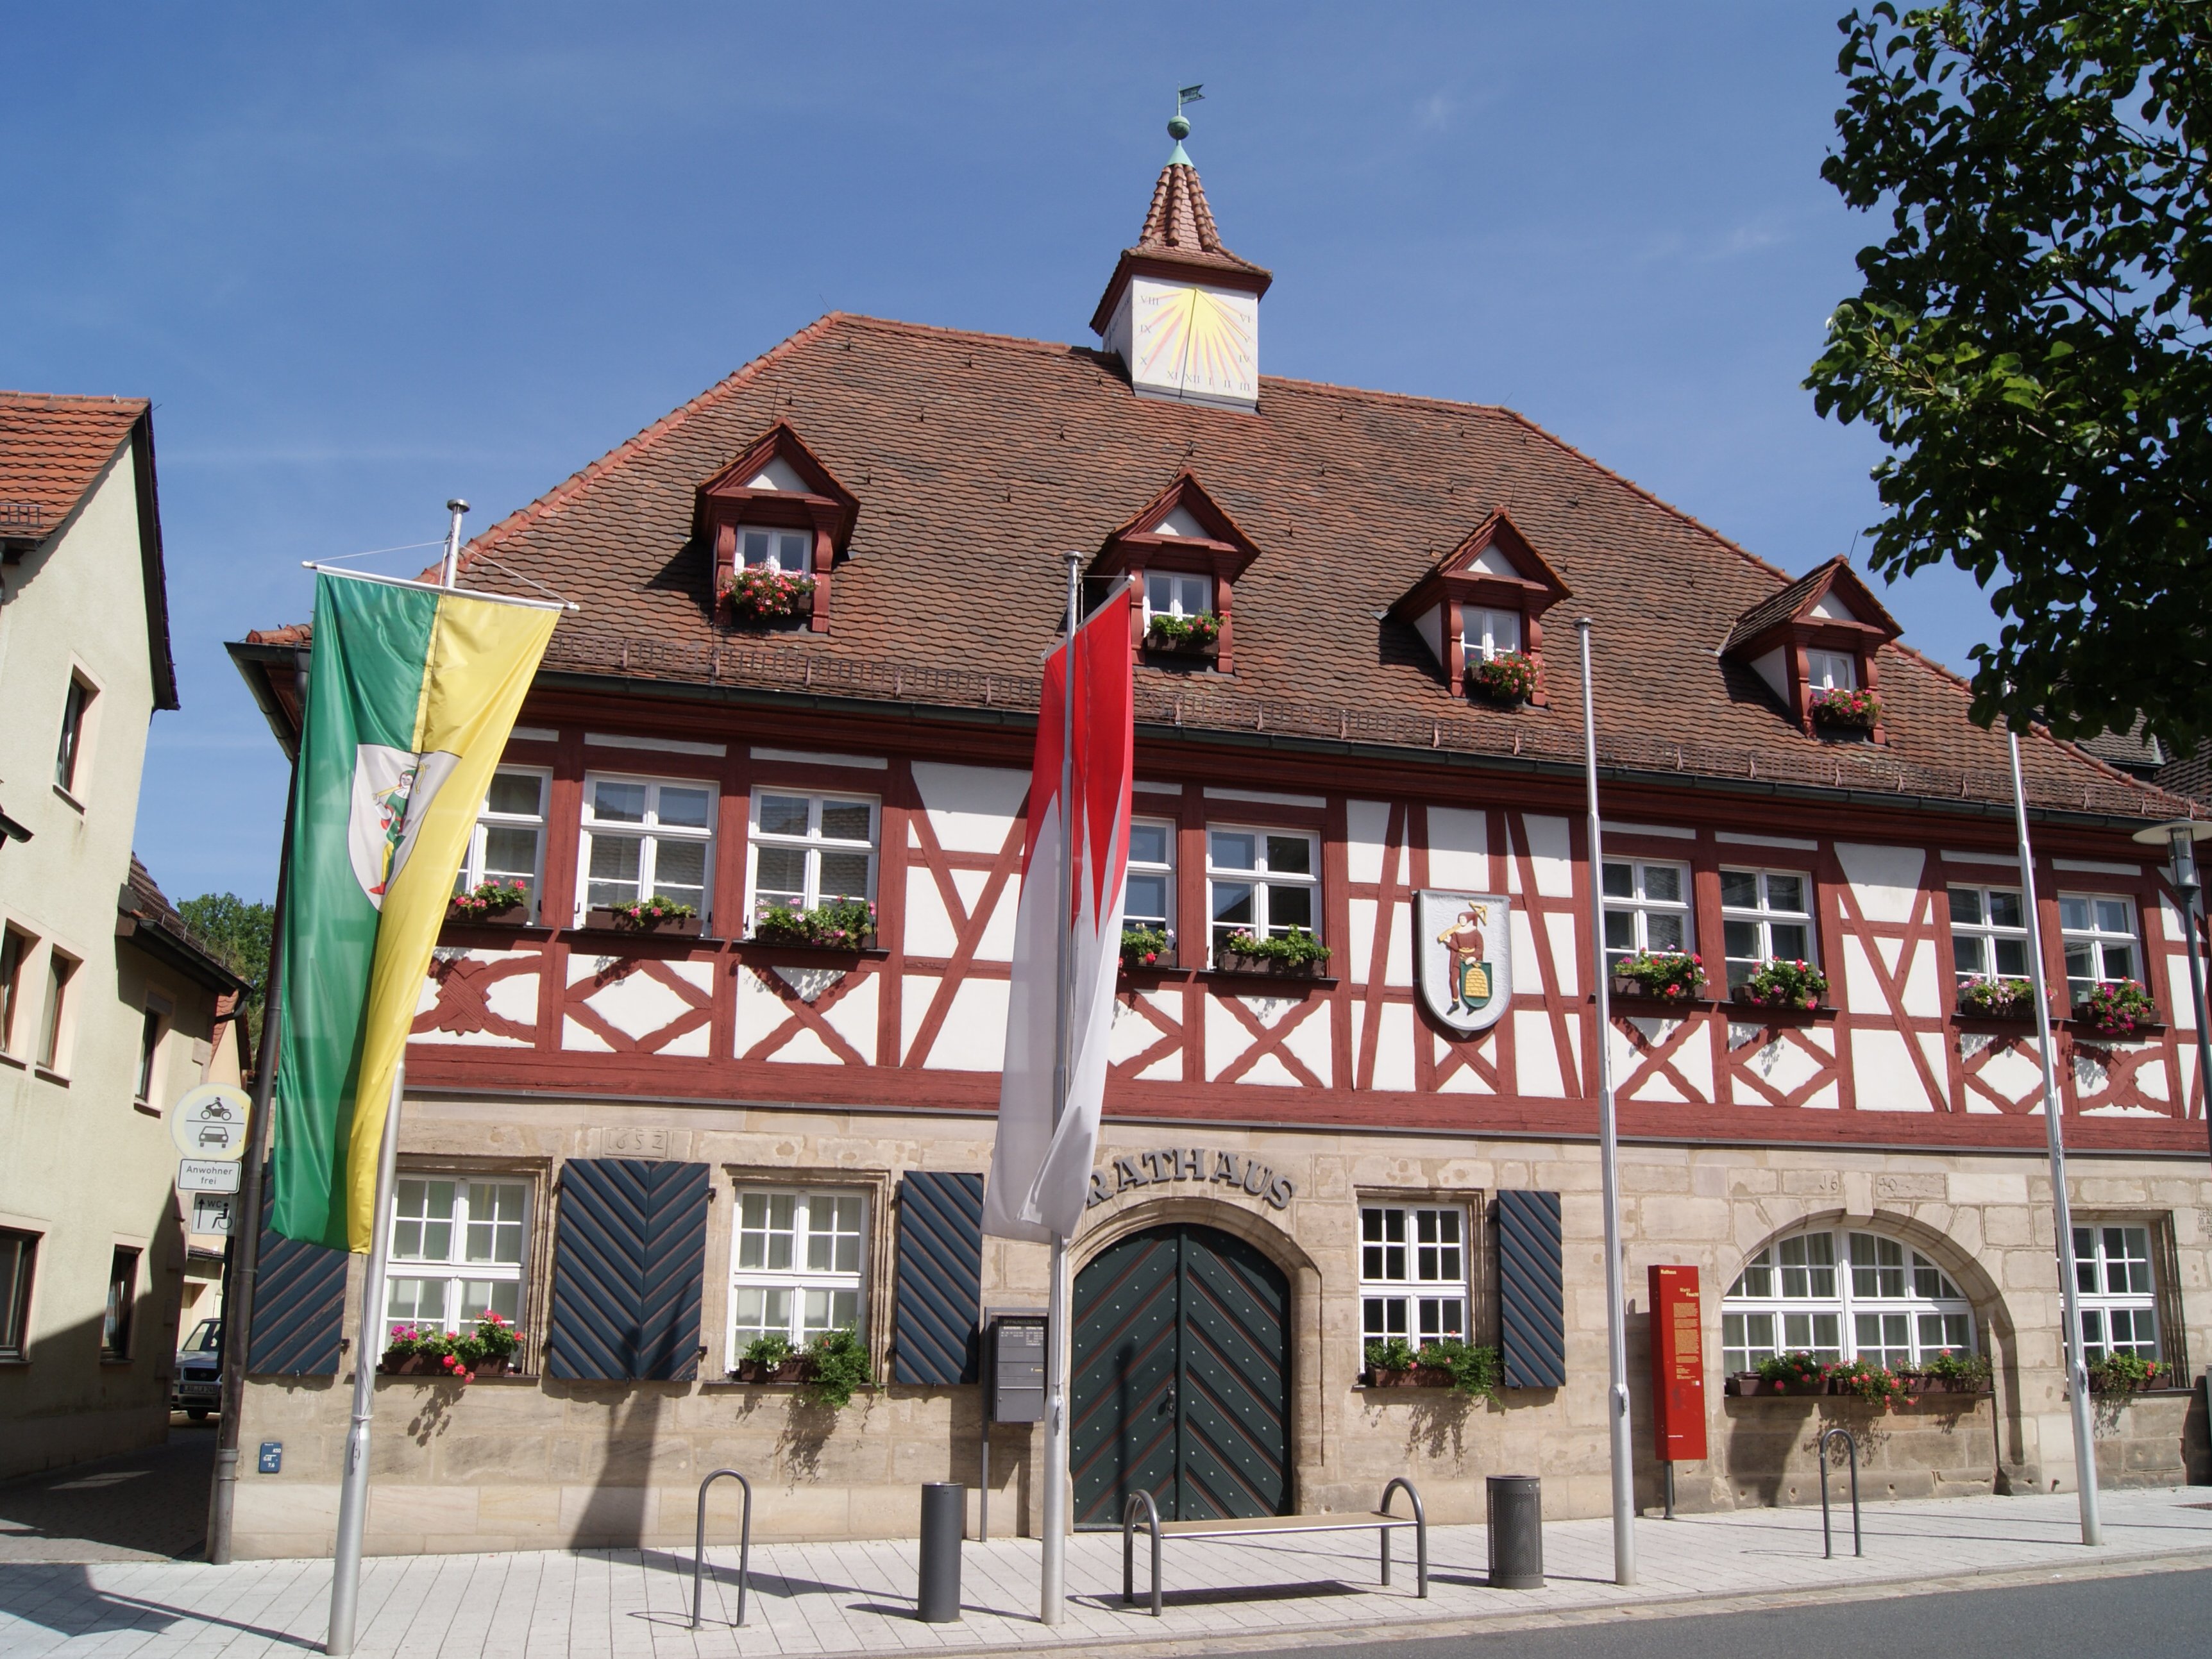 View of the town hall with its half-timbered buildings